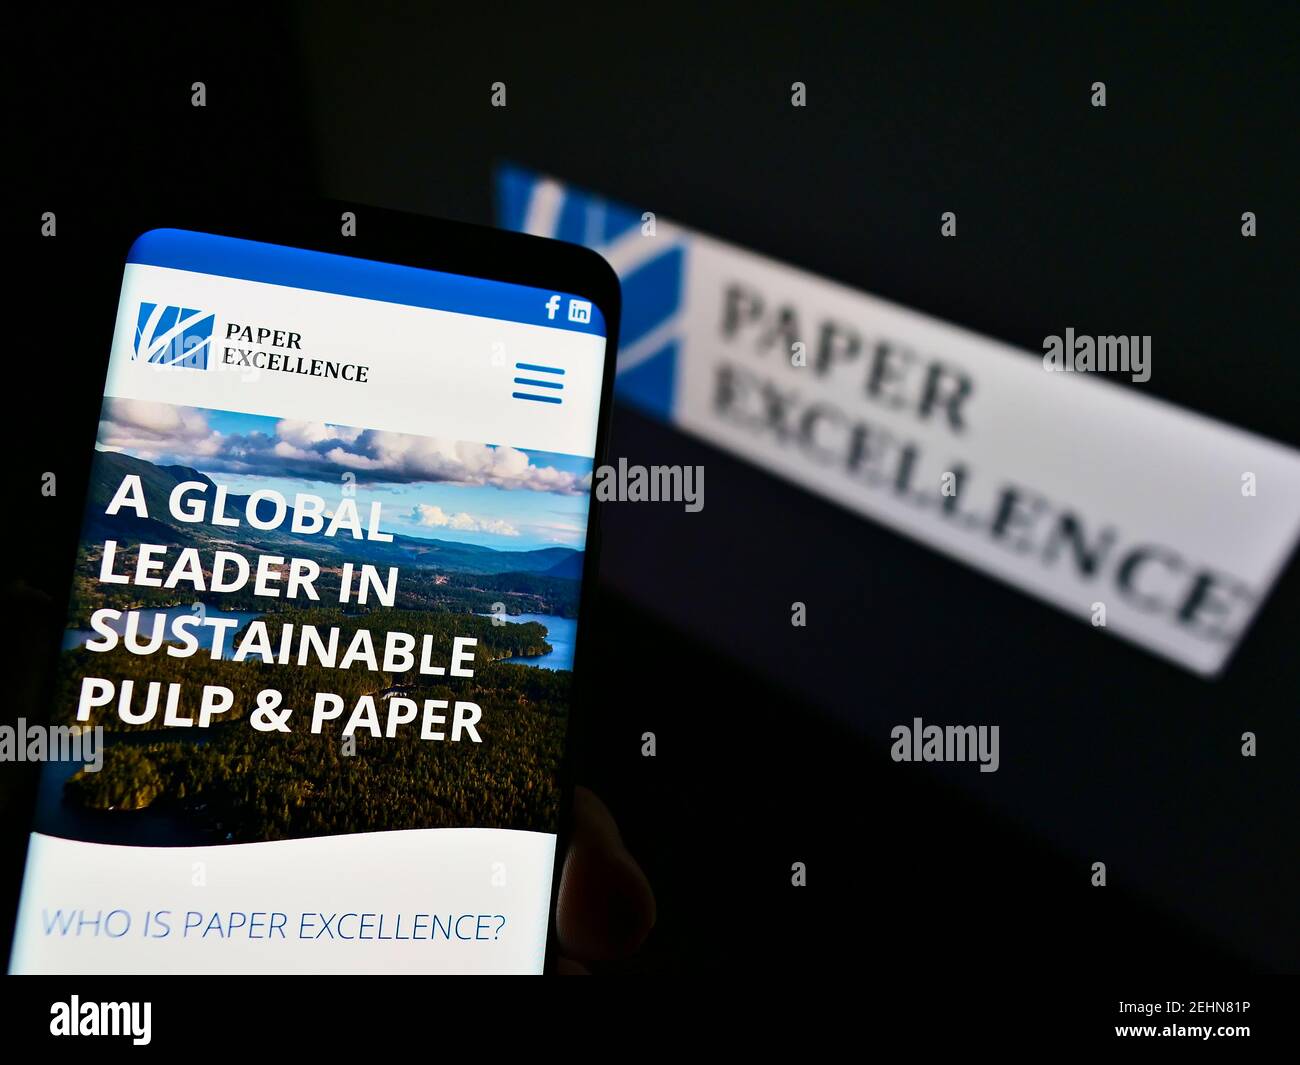 Cellphone with web page of Canadian paper and pulp manufacturer Paper Excellence B.V. on screen in front of logo. Focus on center of phone display. Stock Photo